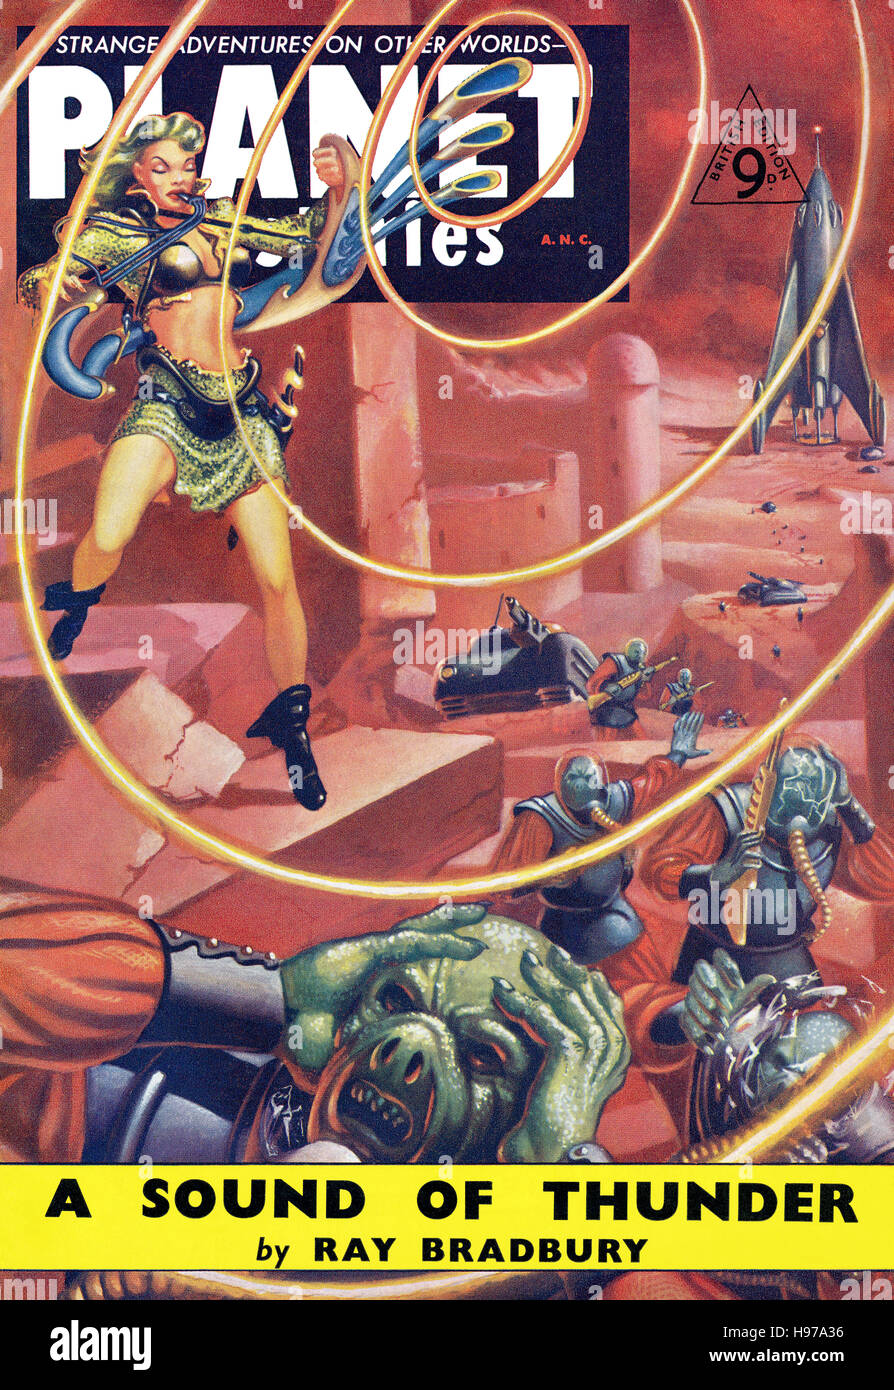 British edition of the January 1954 issue of Planet Stories science fiction magazine Stock Photo